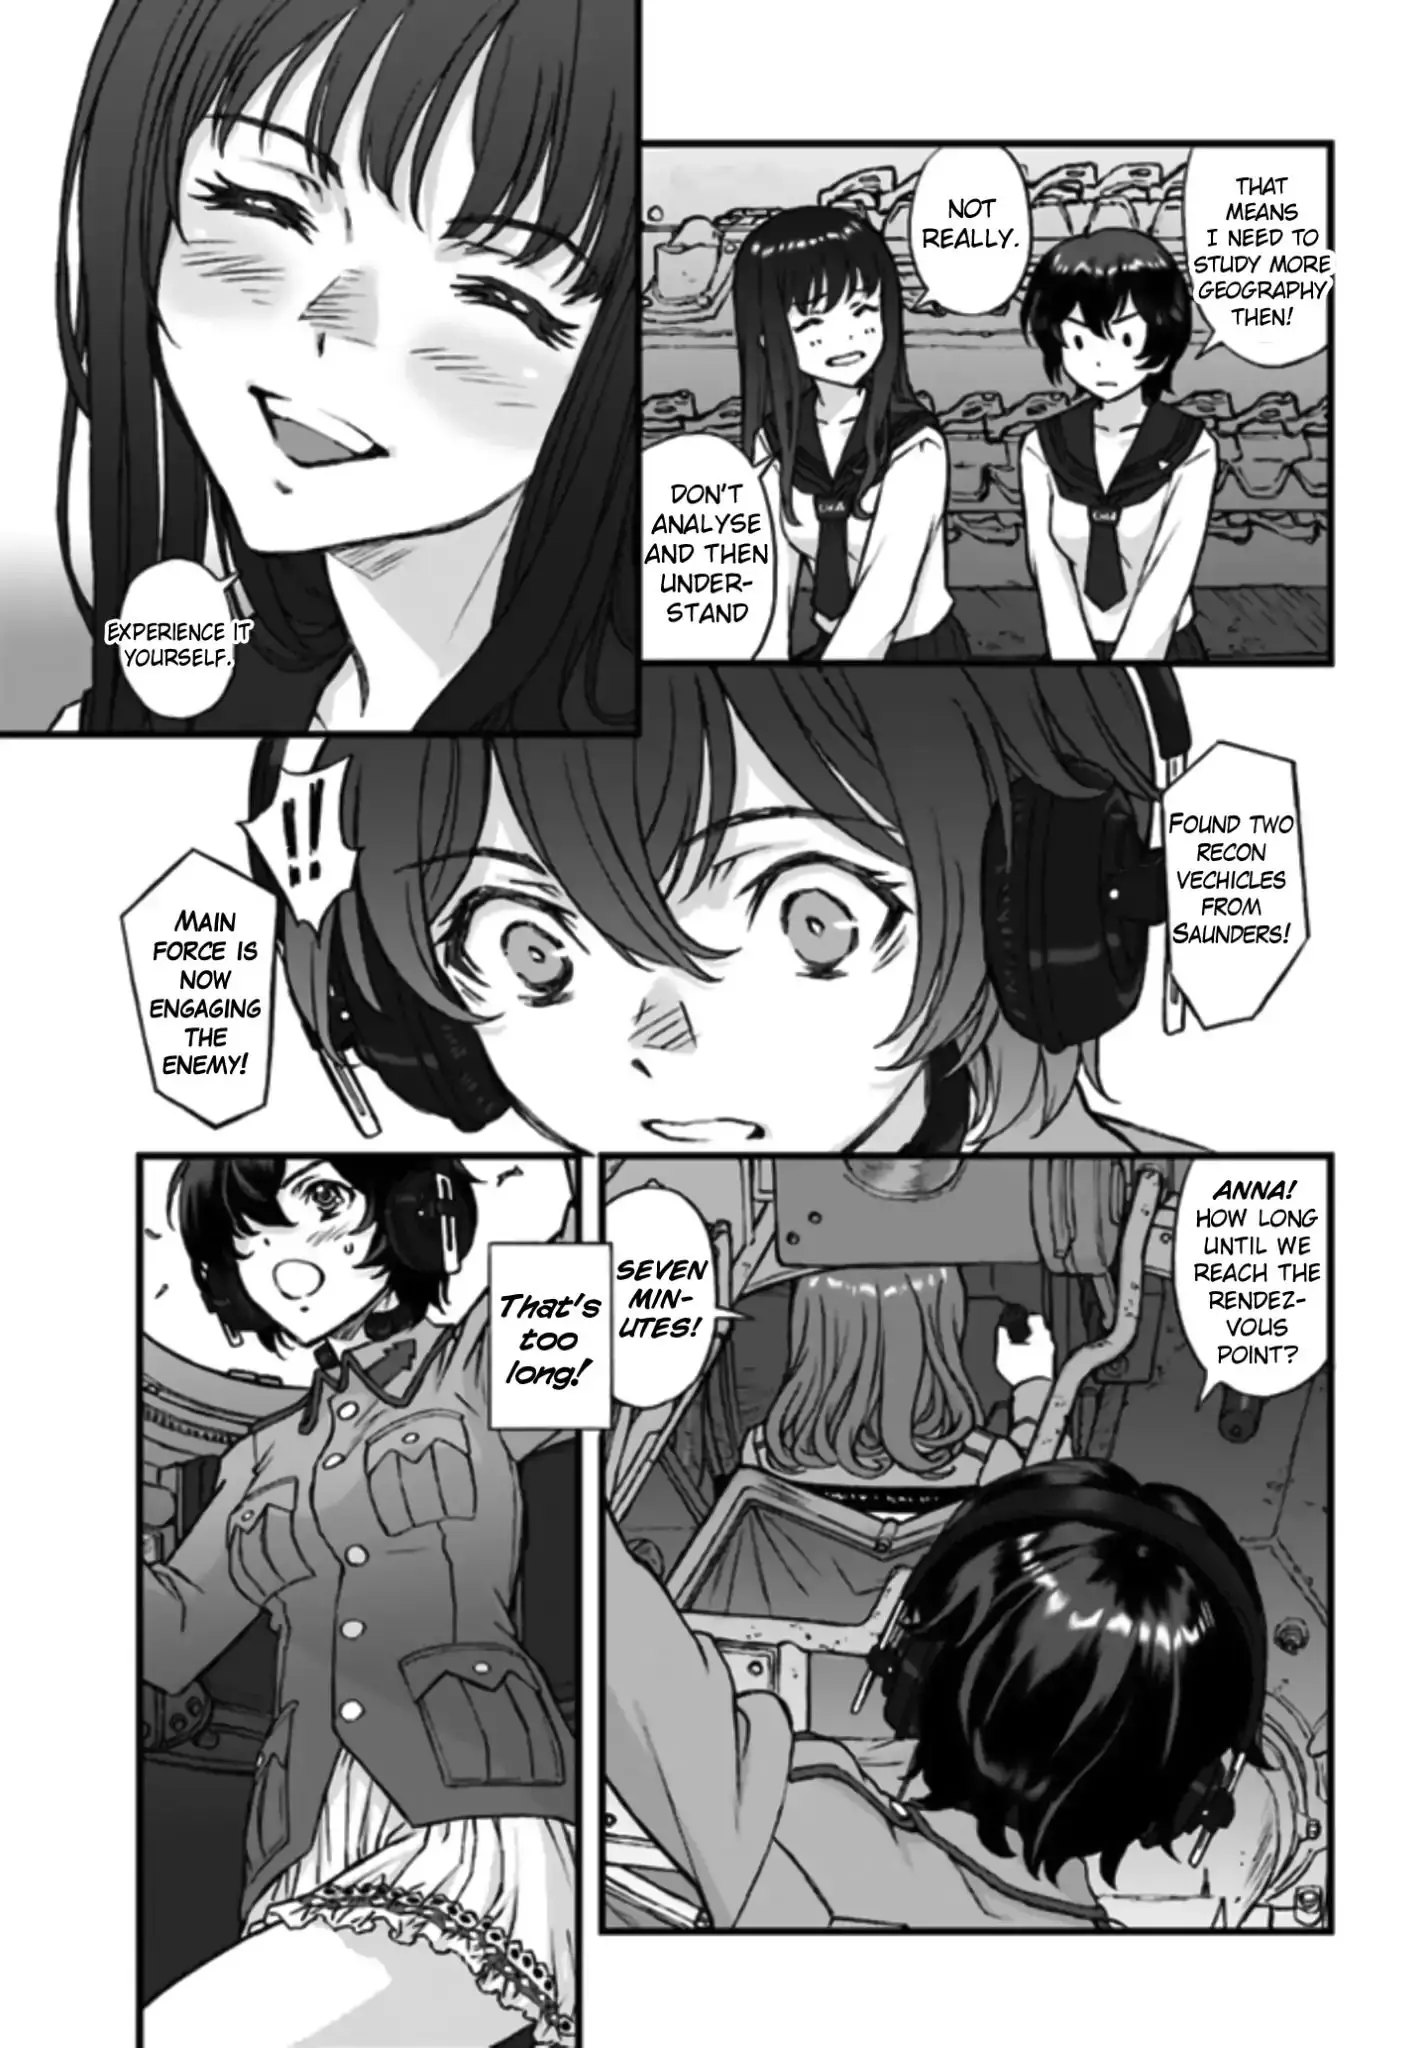 Girls Und Panzer - The Fir Tree And The Iron-Winged Witch - 1 page 4